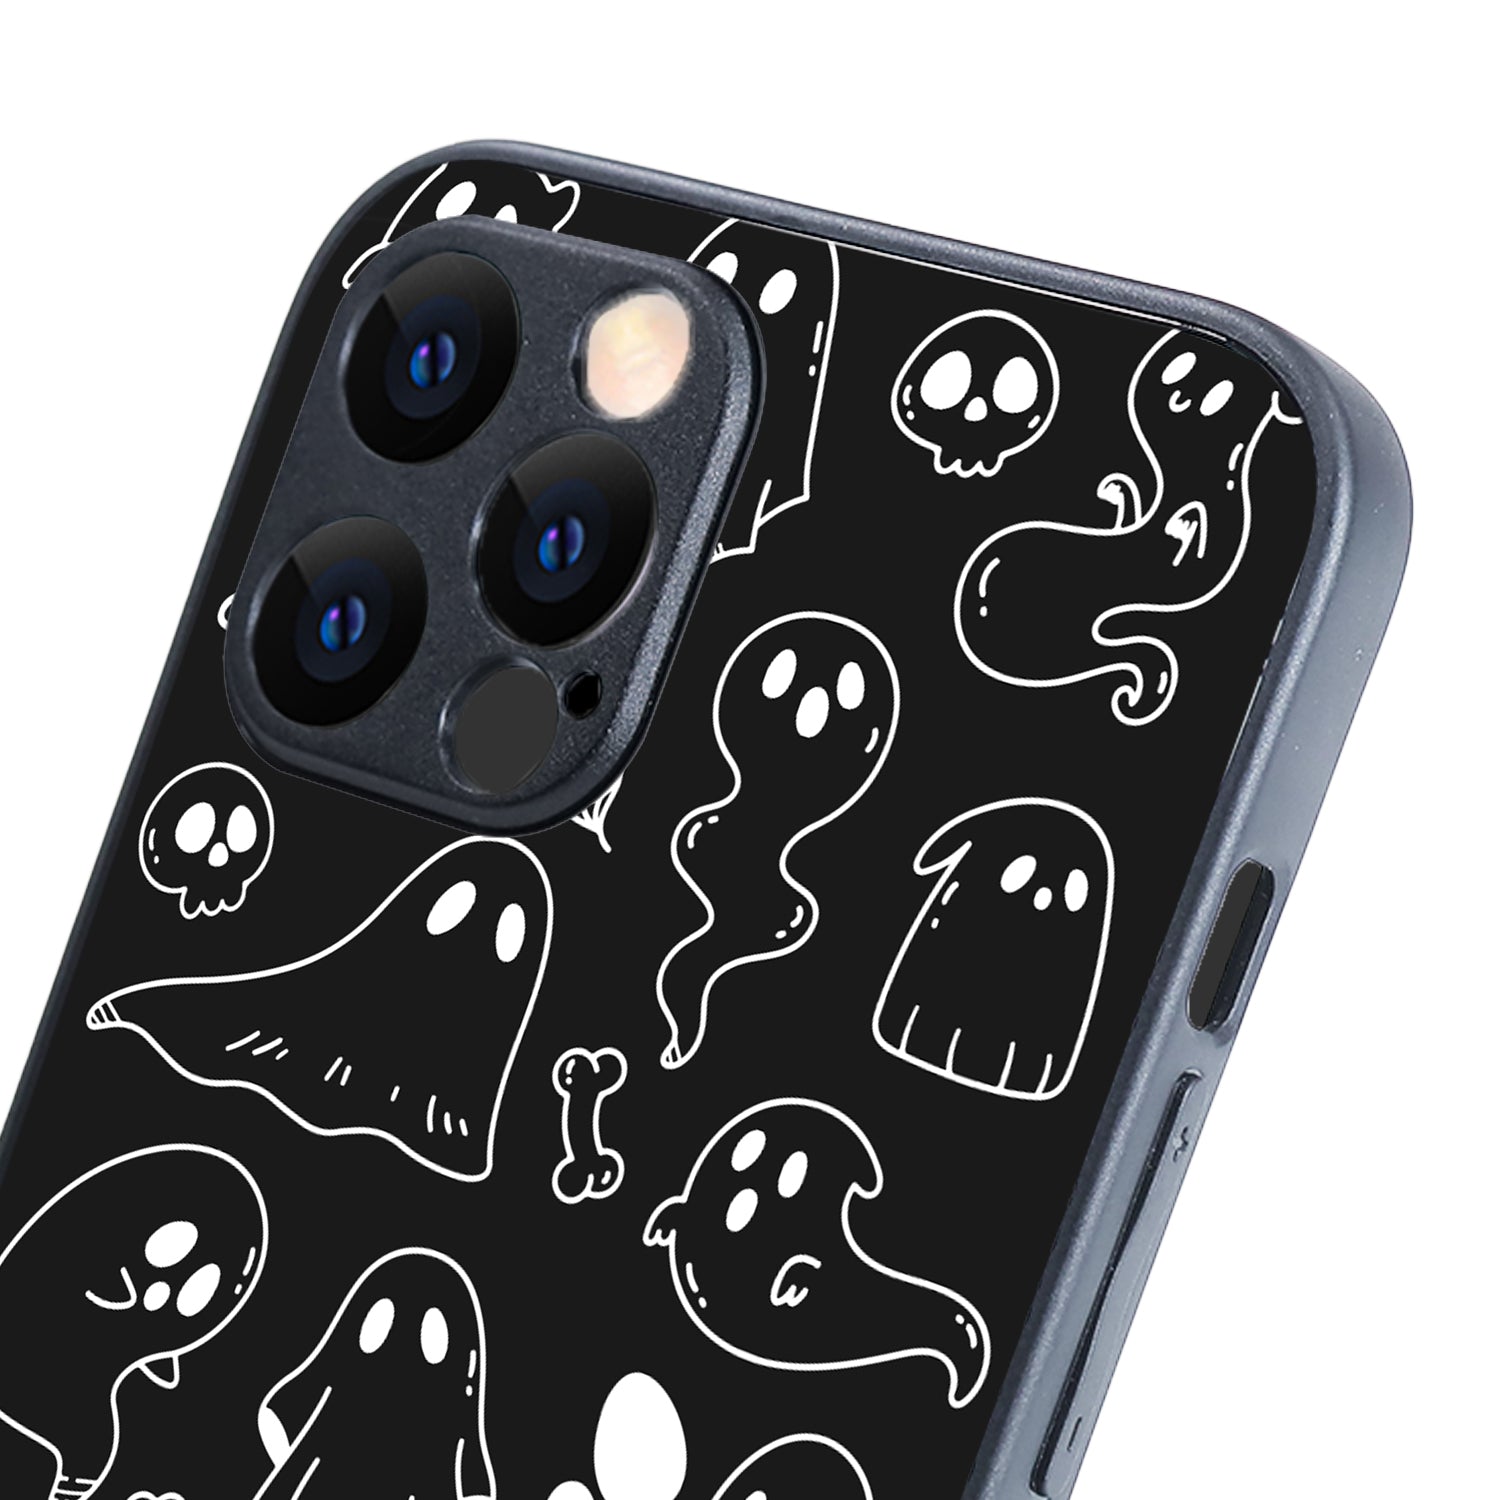 Black Ghost Doodle iPhone 12 Pro Max Case